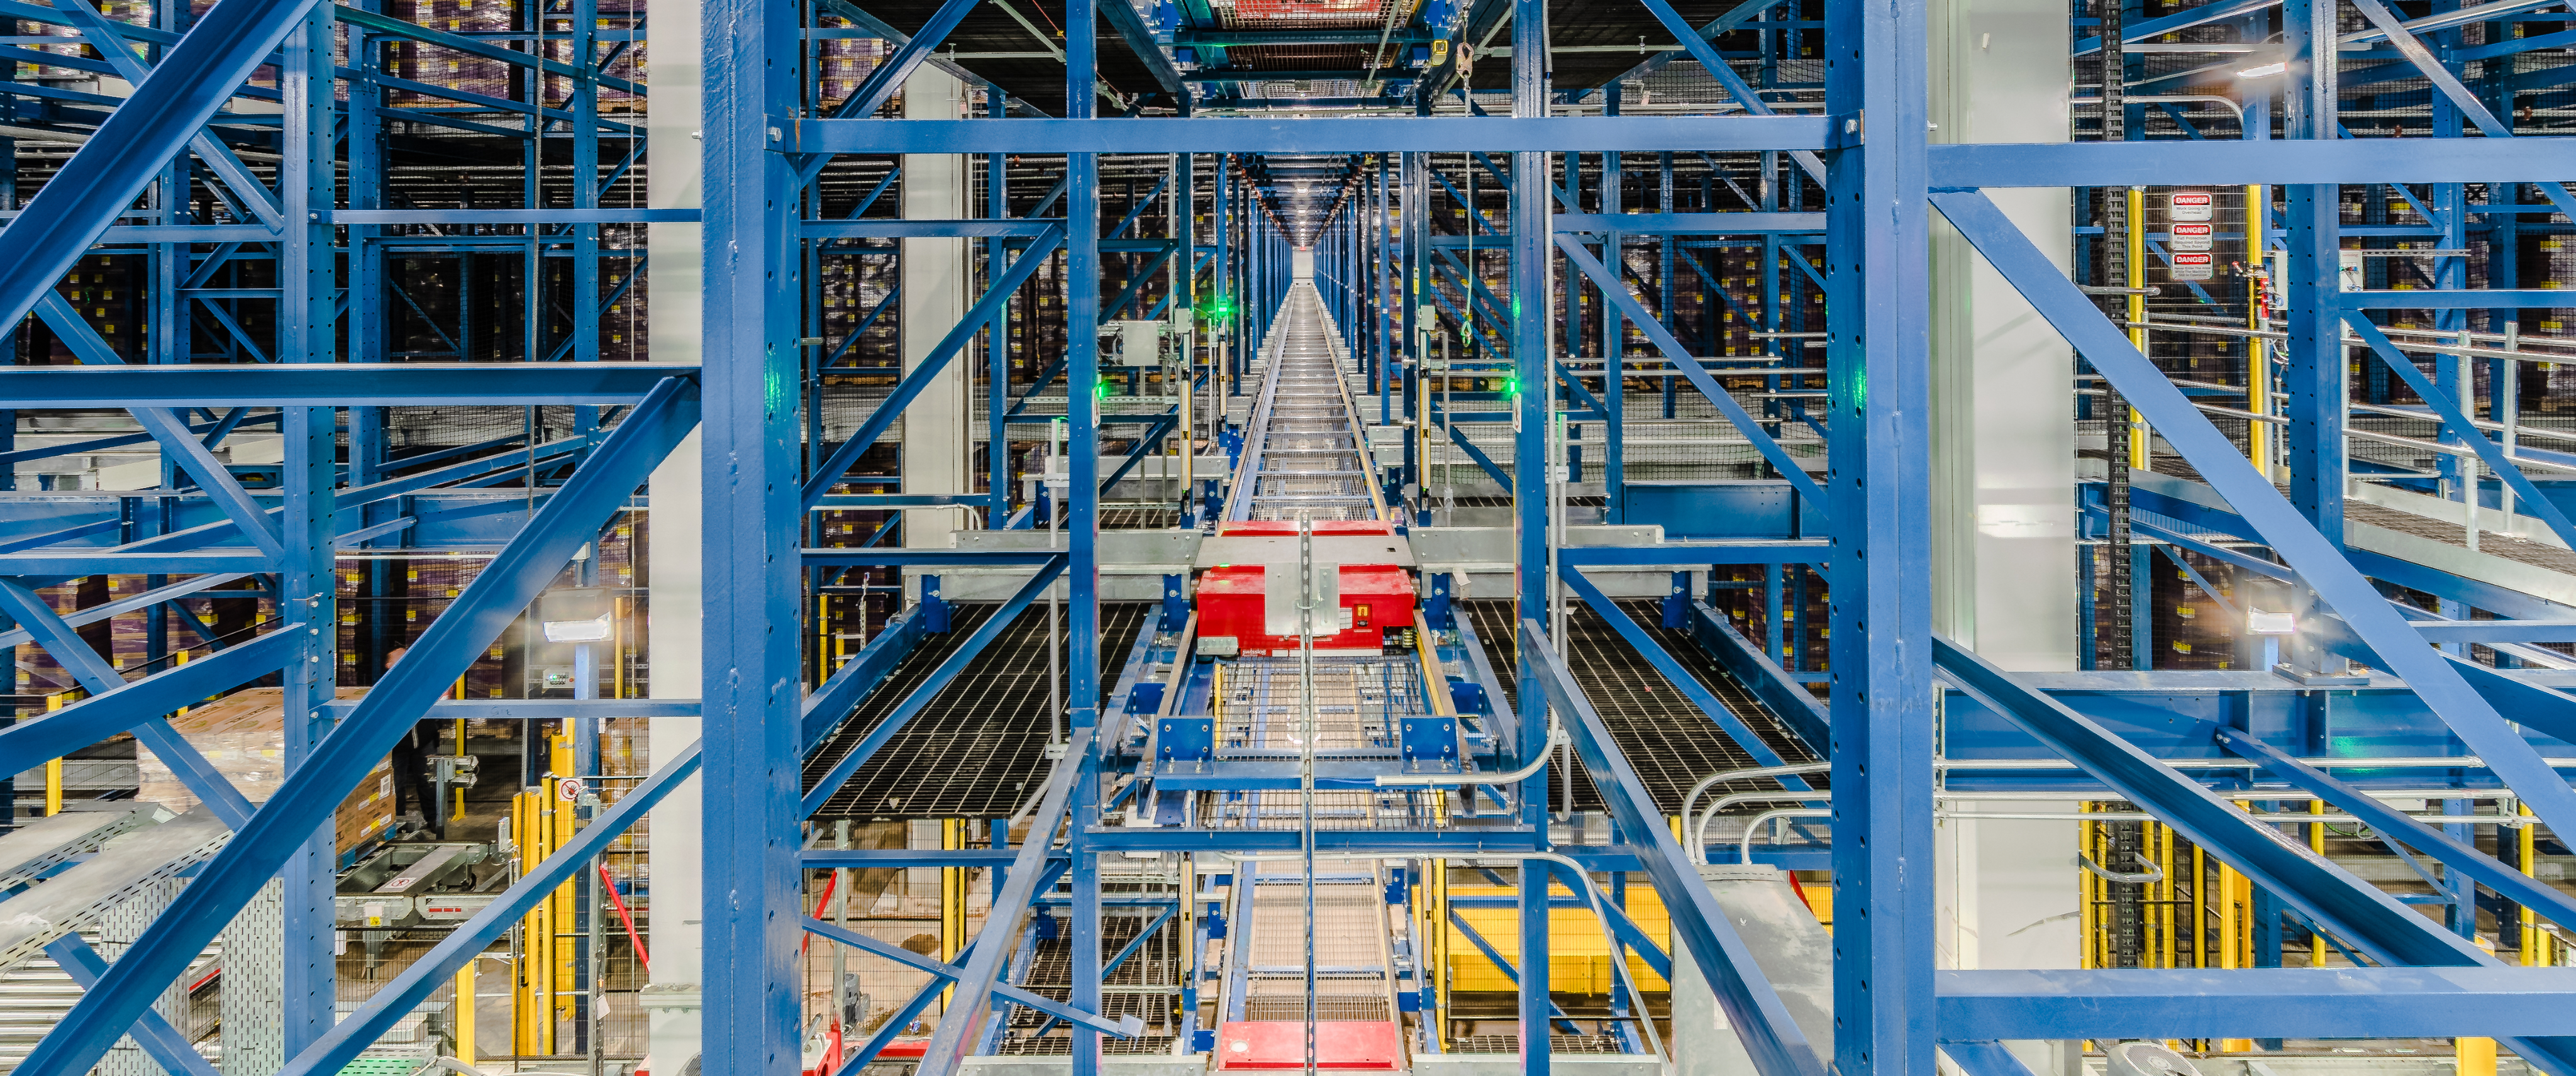 Interior photo of automated Lineage cold storage facility.